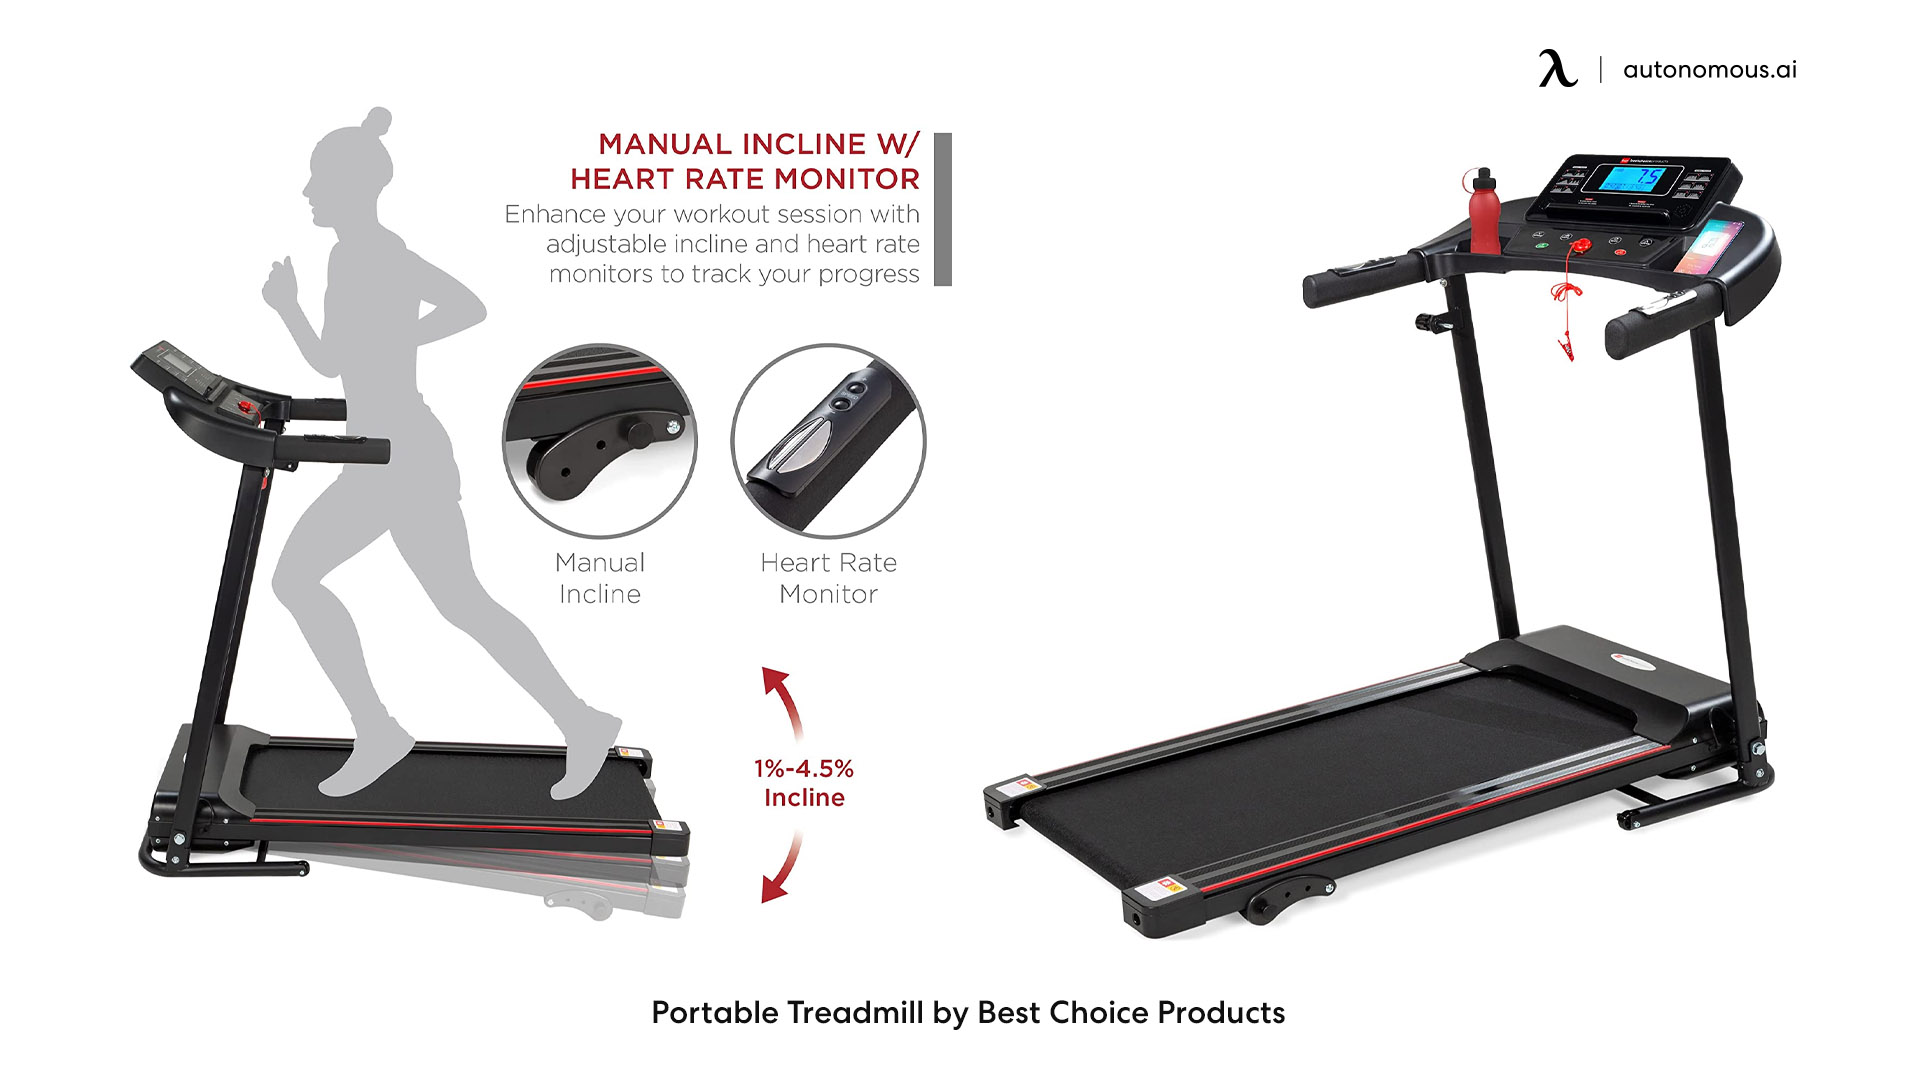 Portable Treadmill by Best Choice Products